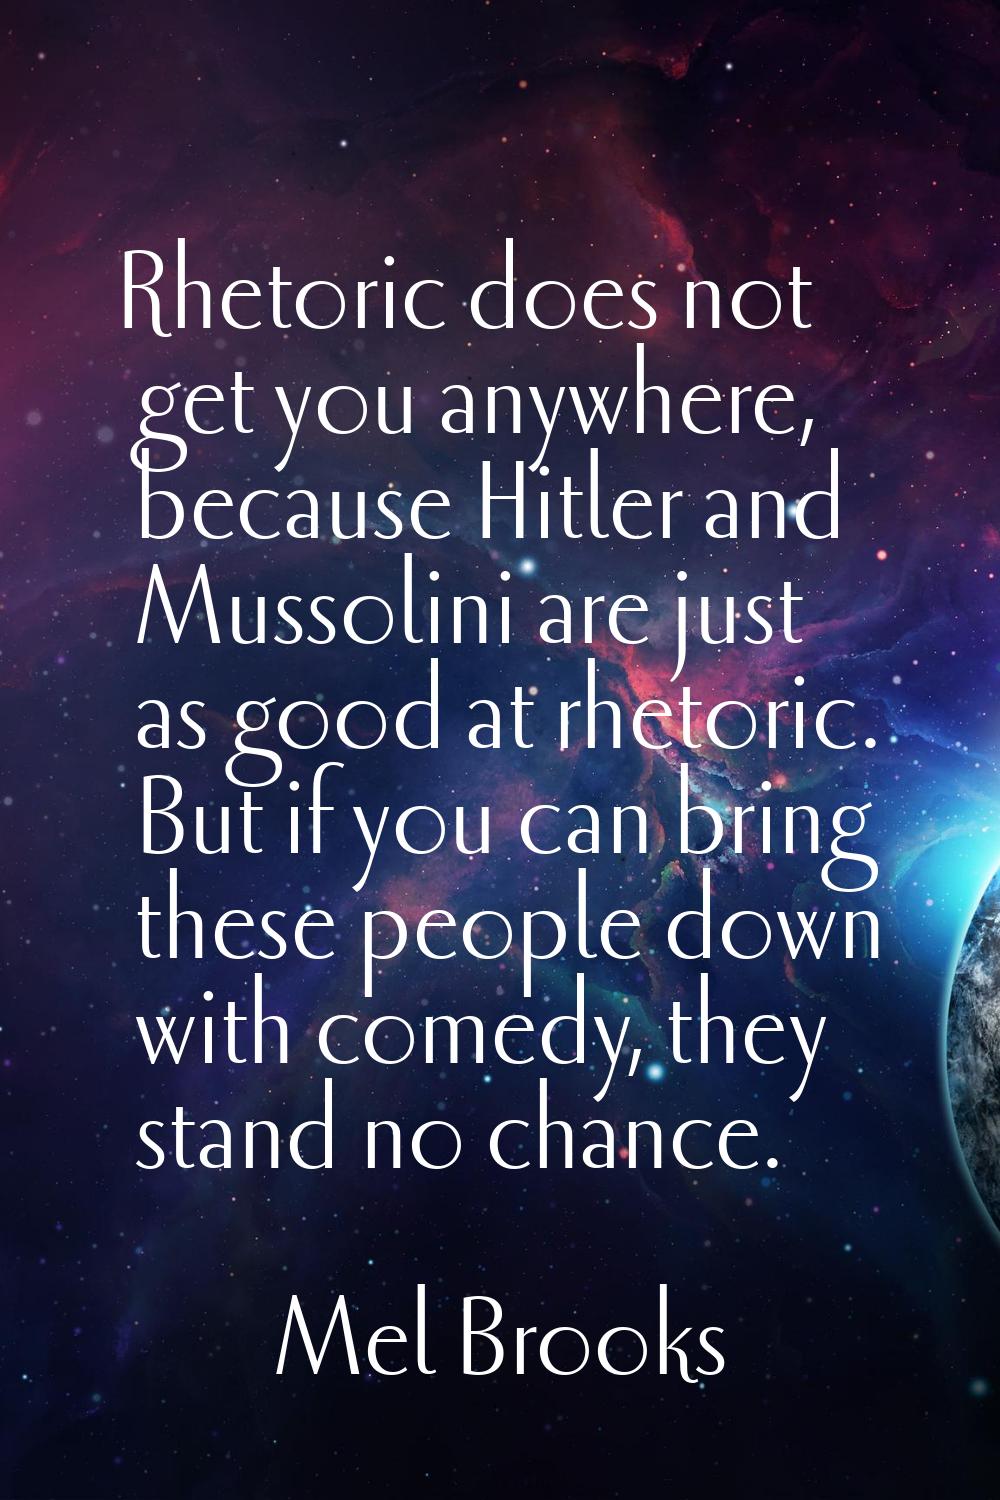 Rhetoric does not get you anywhere, because Hitler and Mussolini are just as good at rhetoric. But 